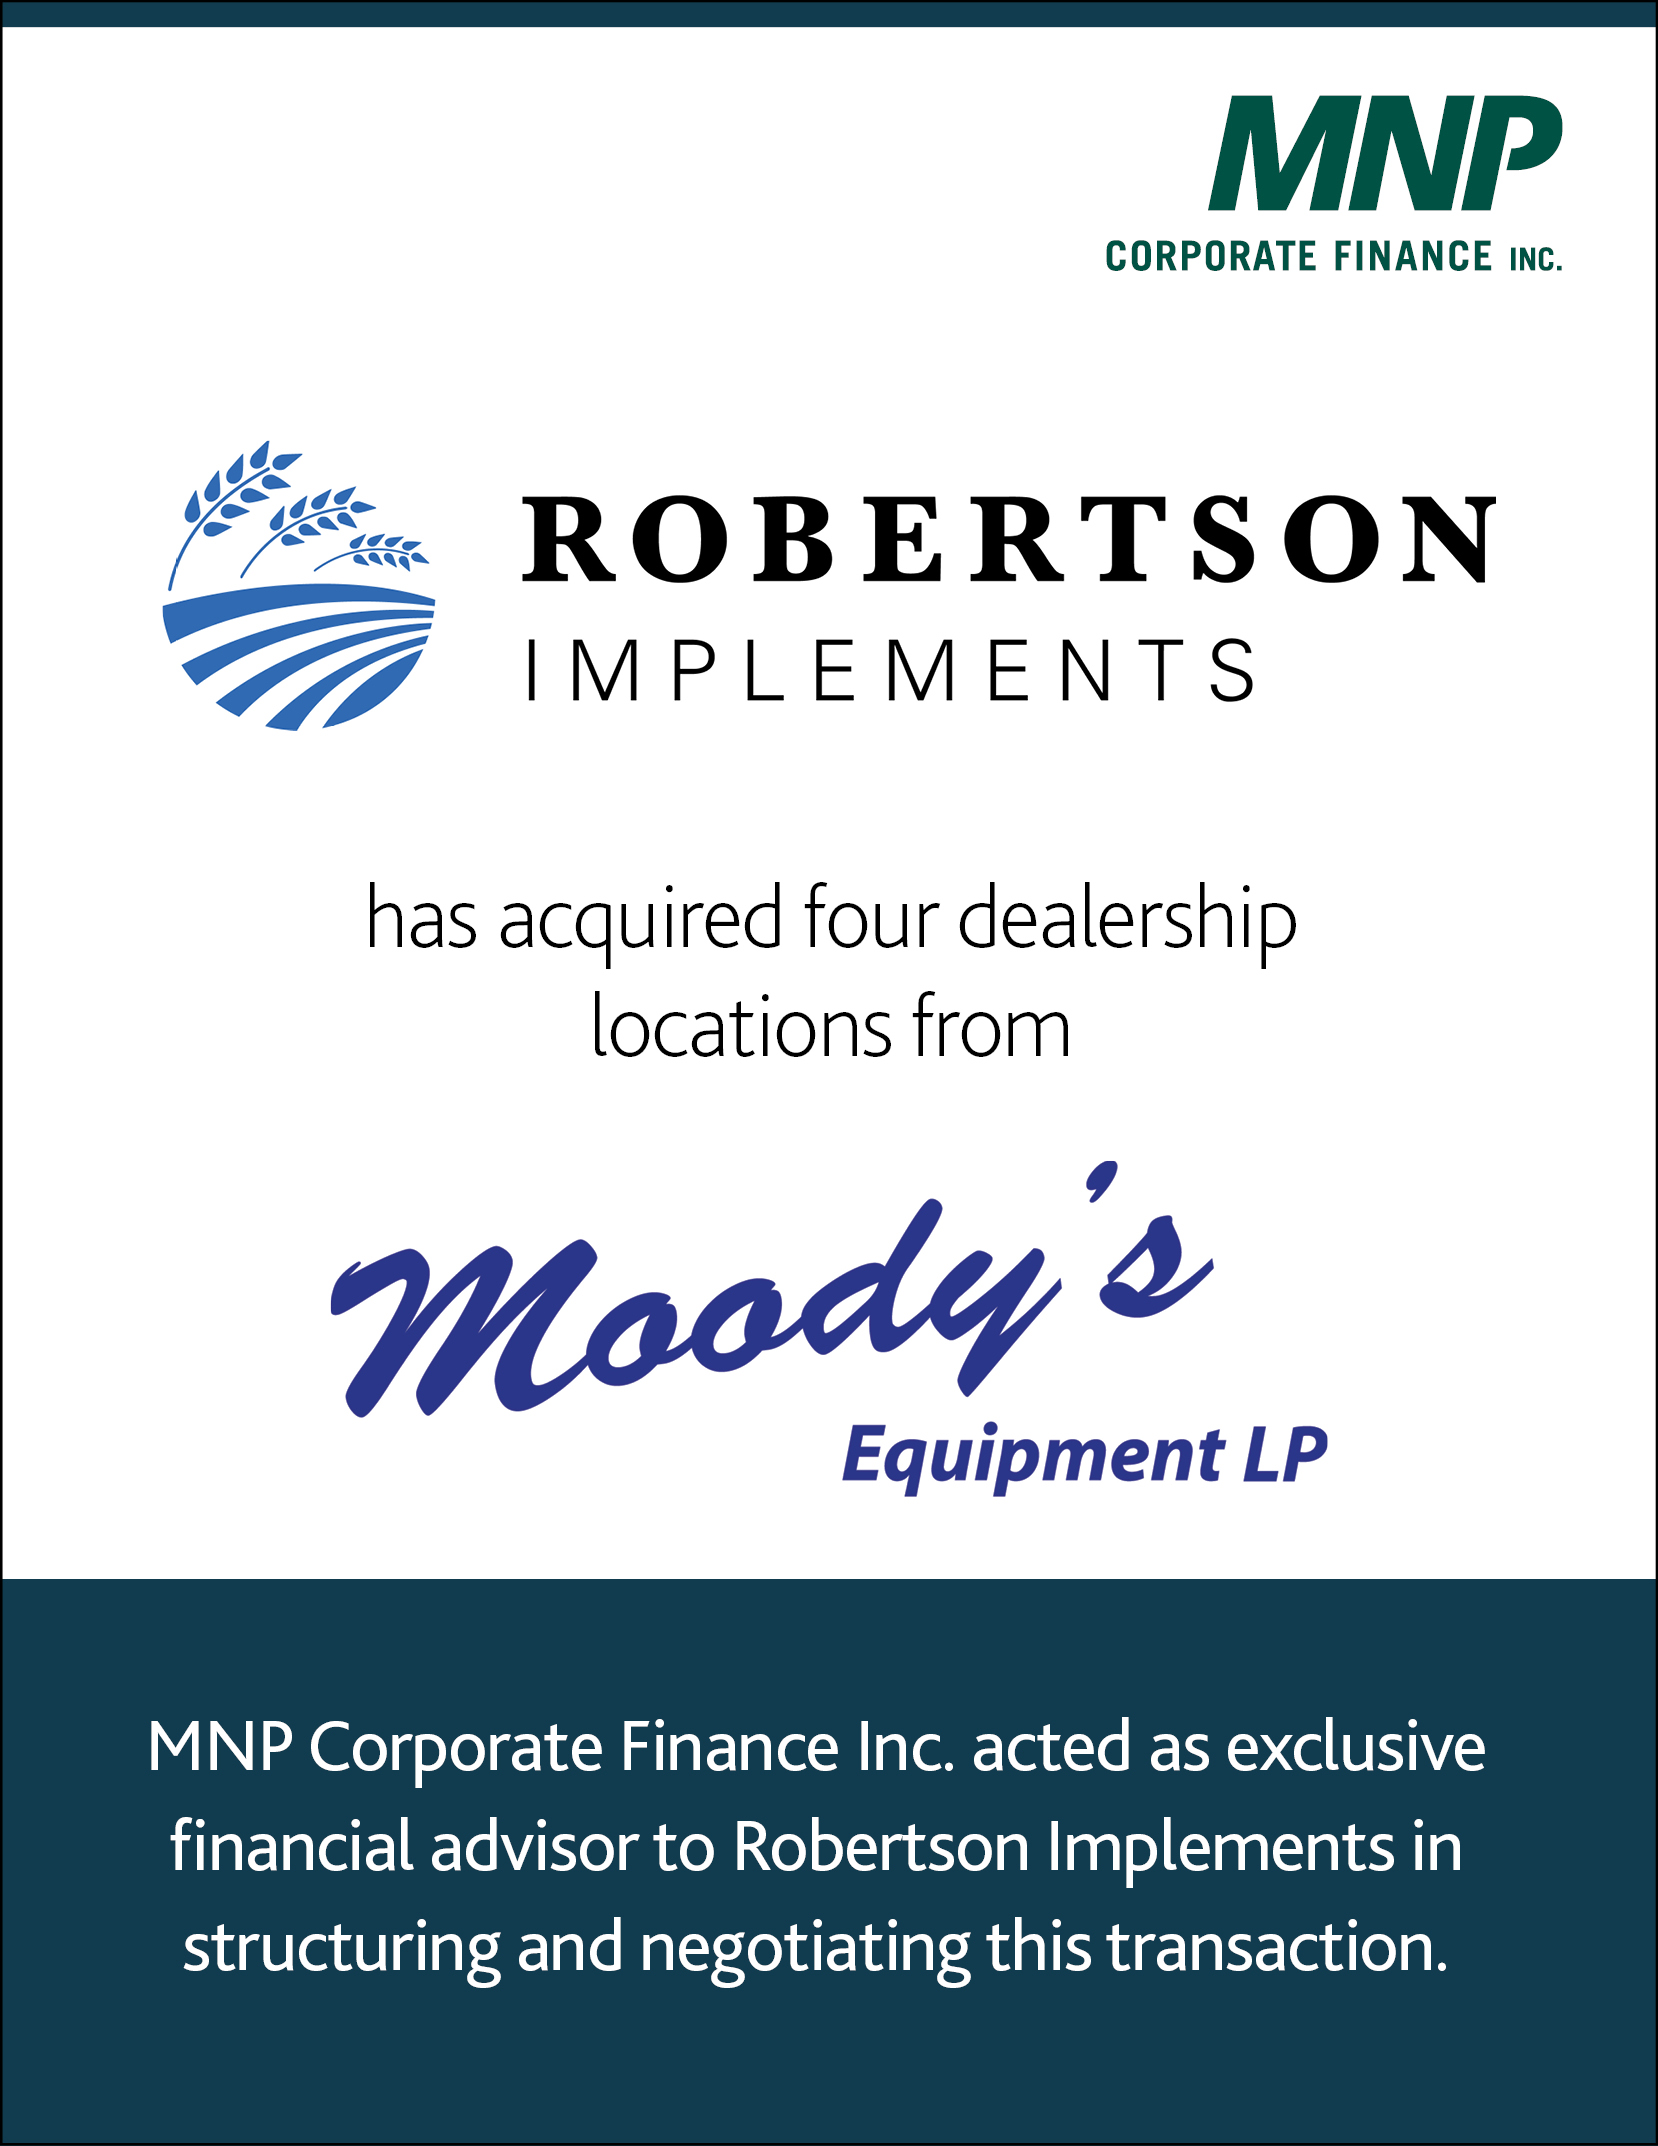 Robertson Implements has acquired four dealership locations from Moody's Equipment LP